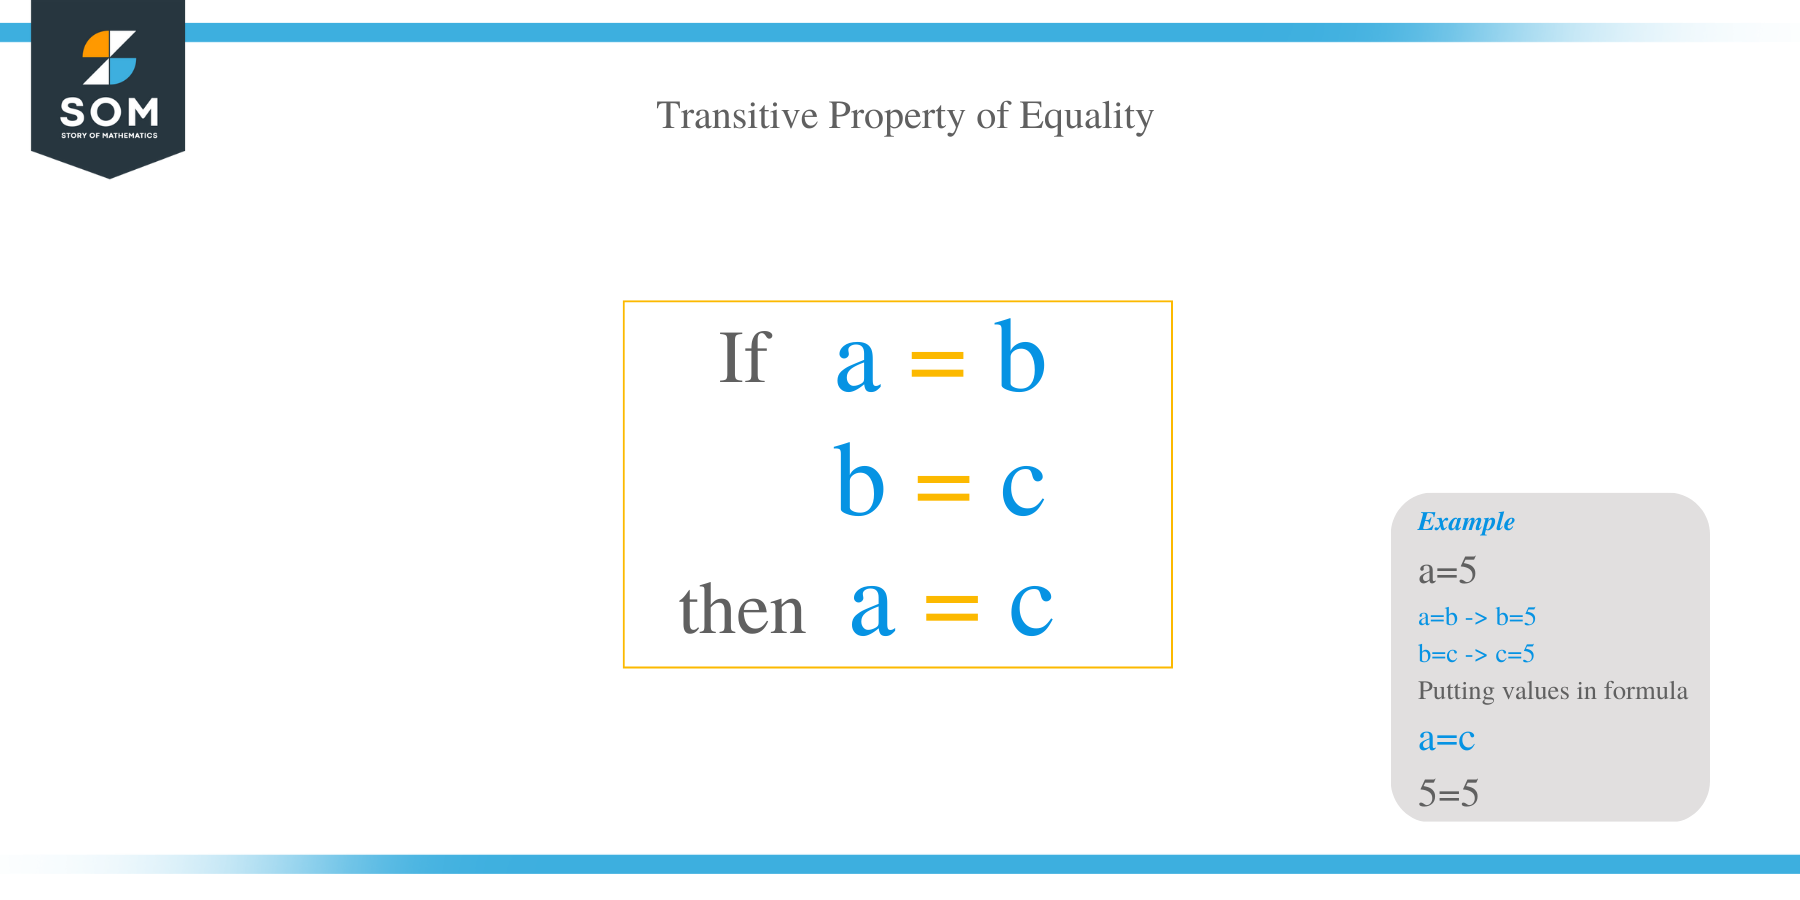 What Is the Transitive Property of Equality?